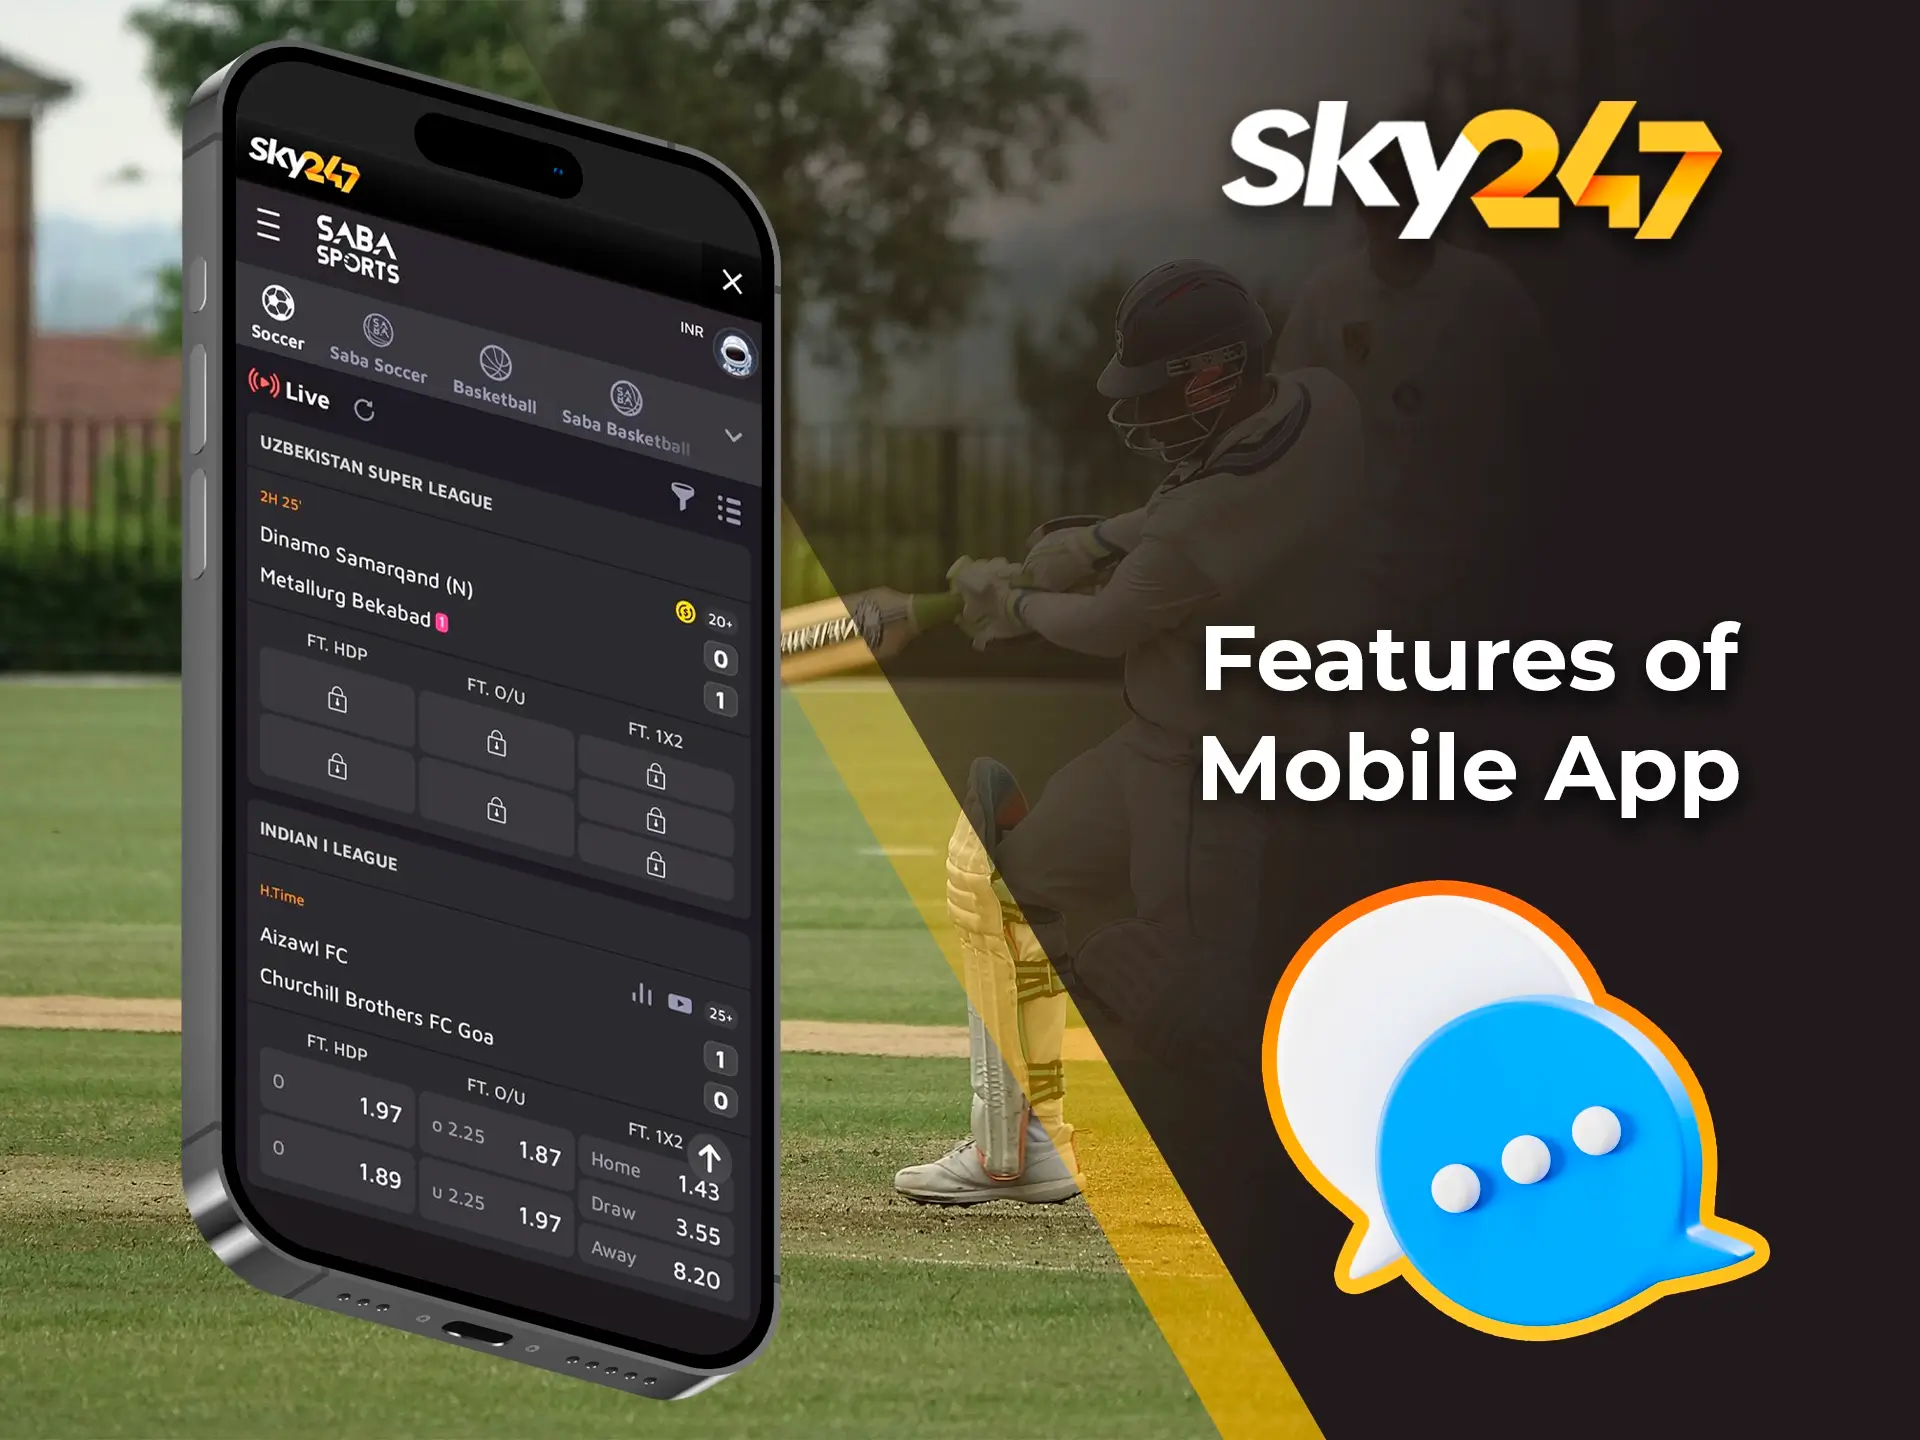 The Sky247 mobile app gives all users a great way to place bets from anywhere, as well as make instant withdrawals.